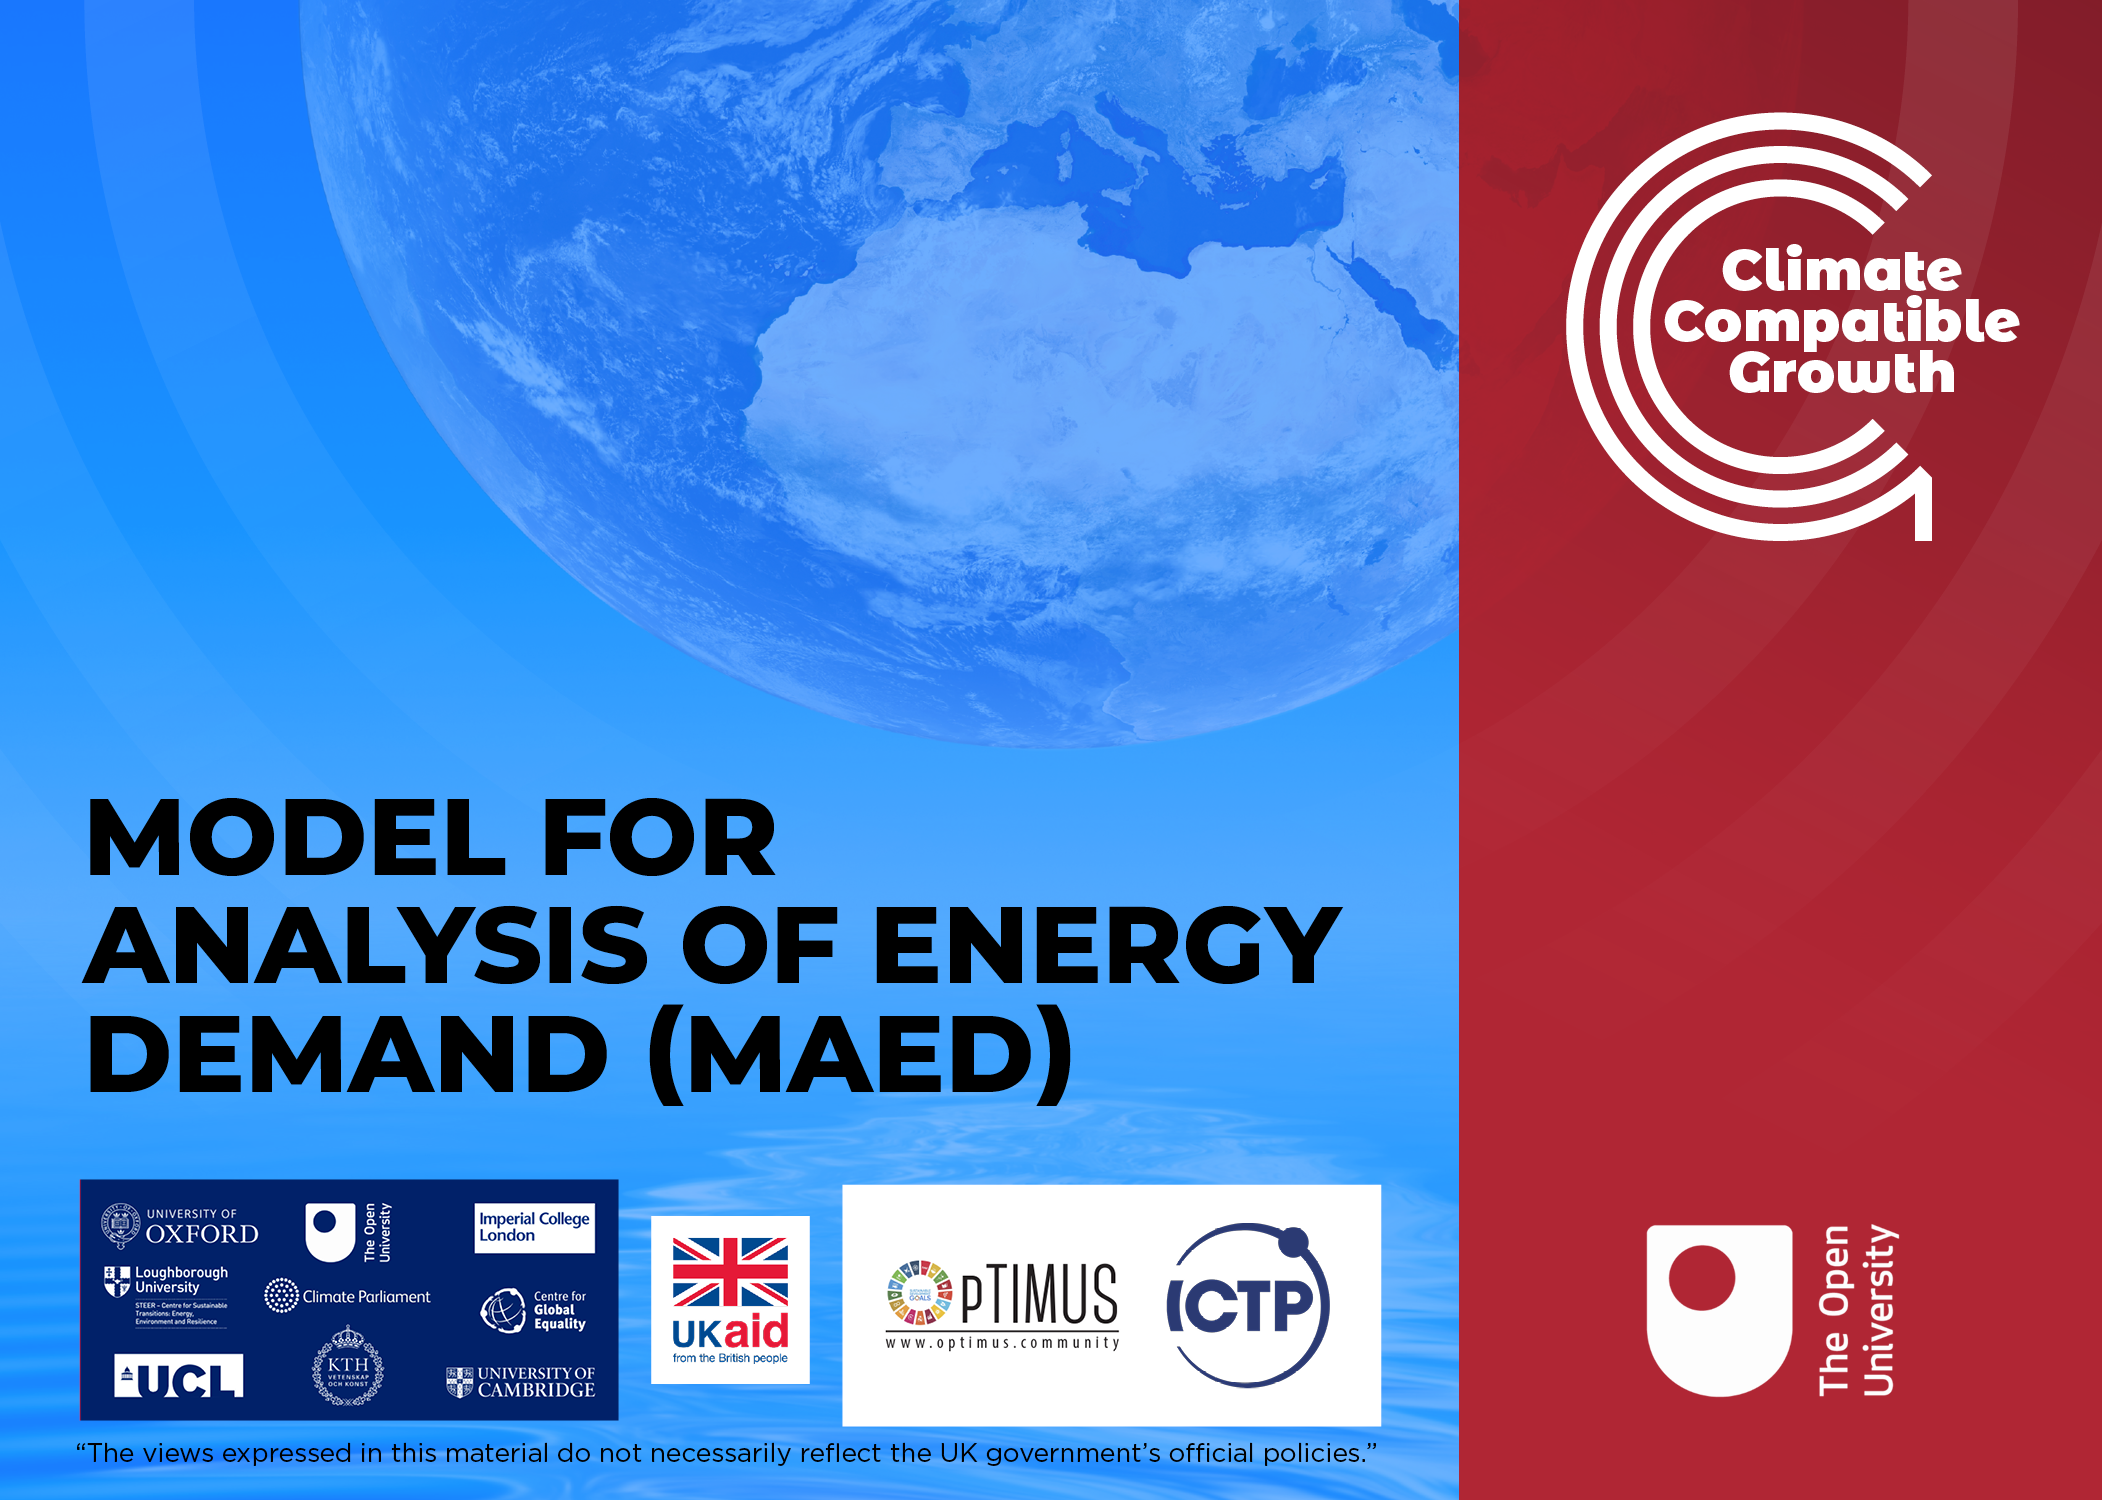 Energy Demand Projections with MAED (Model for Analysis of Energy Demand)